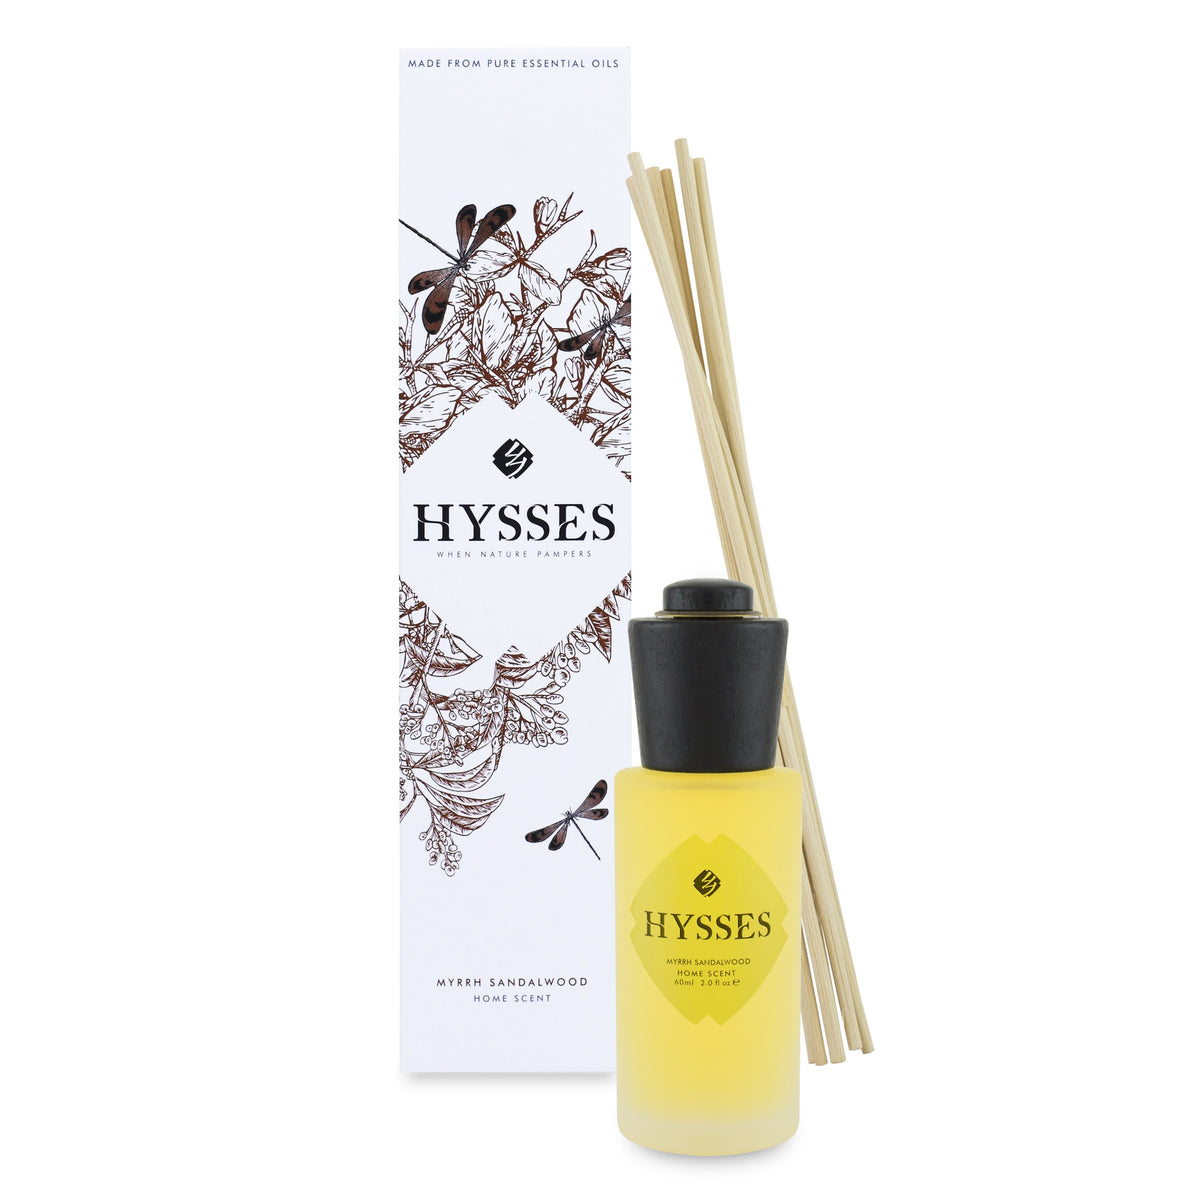 Hysses Home Scents 60ml Home Scent Reed Diffuser Myrrh Sandalwood